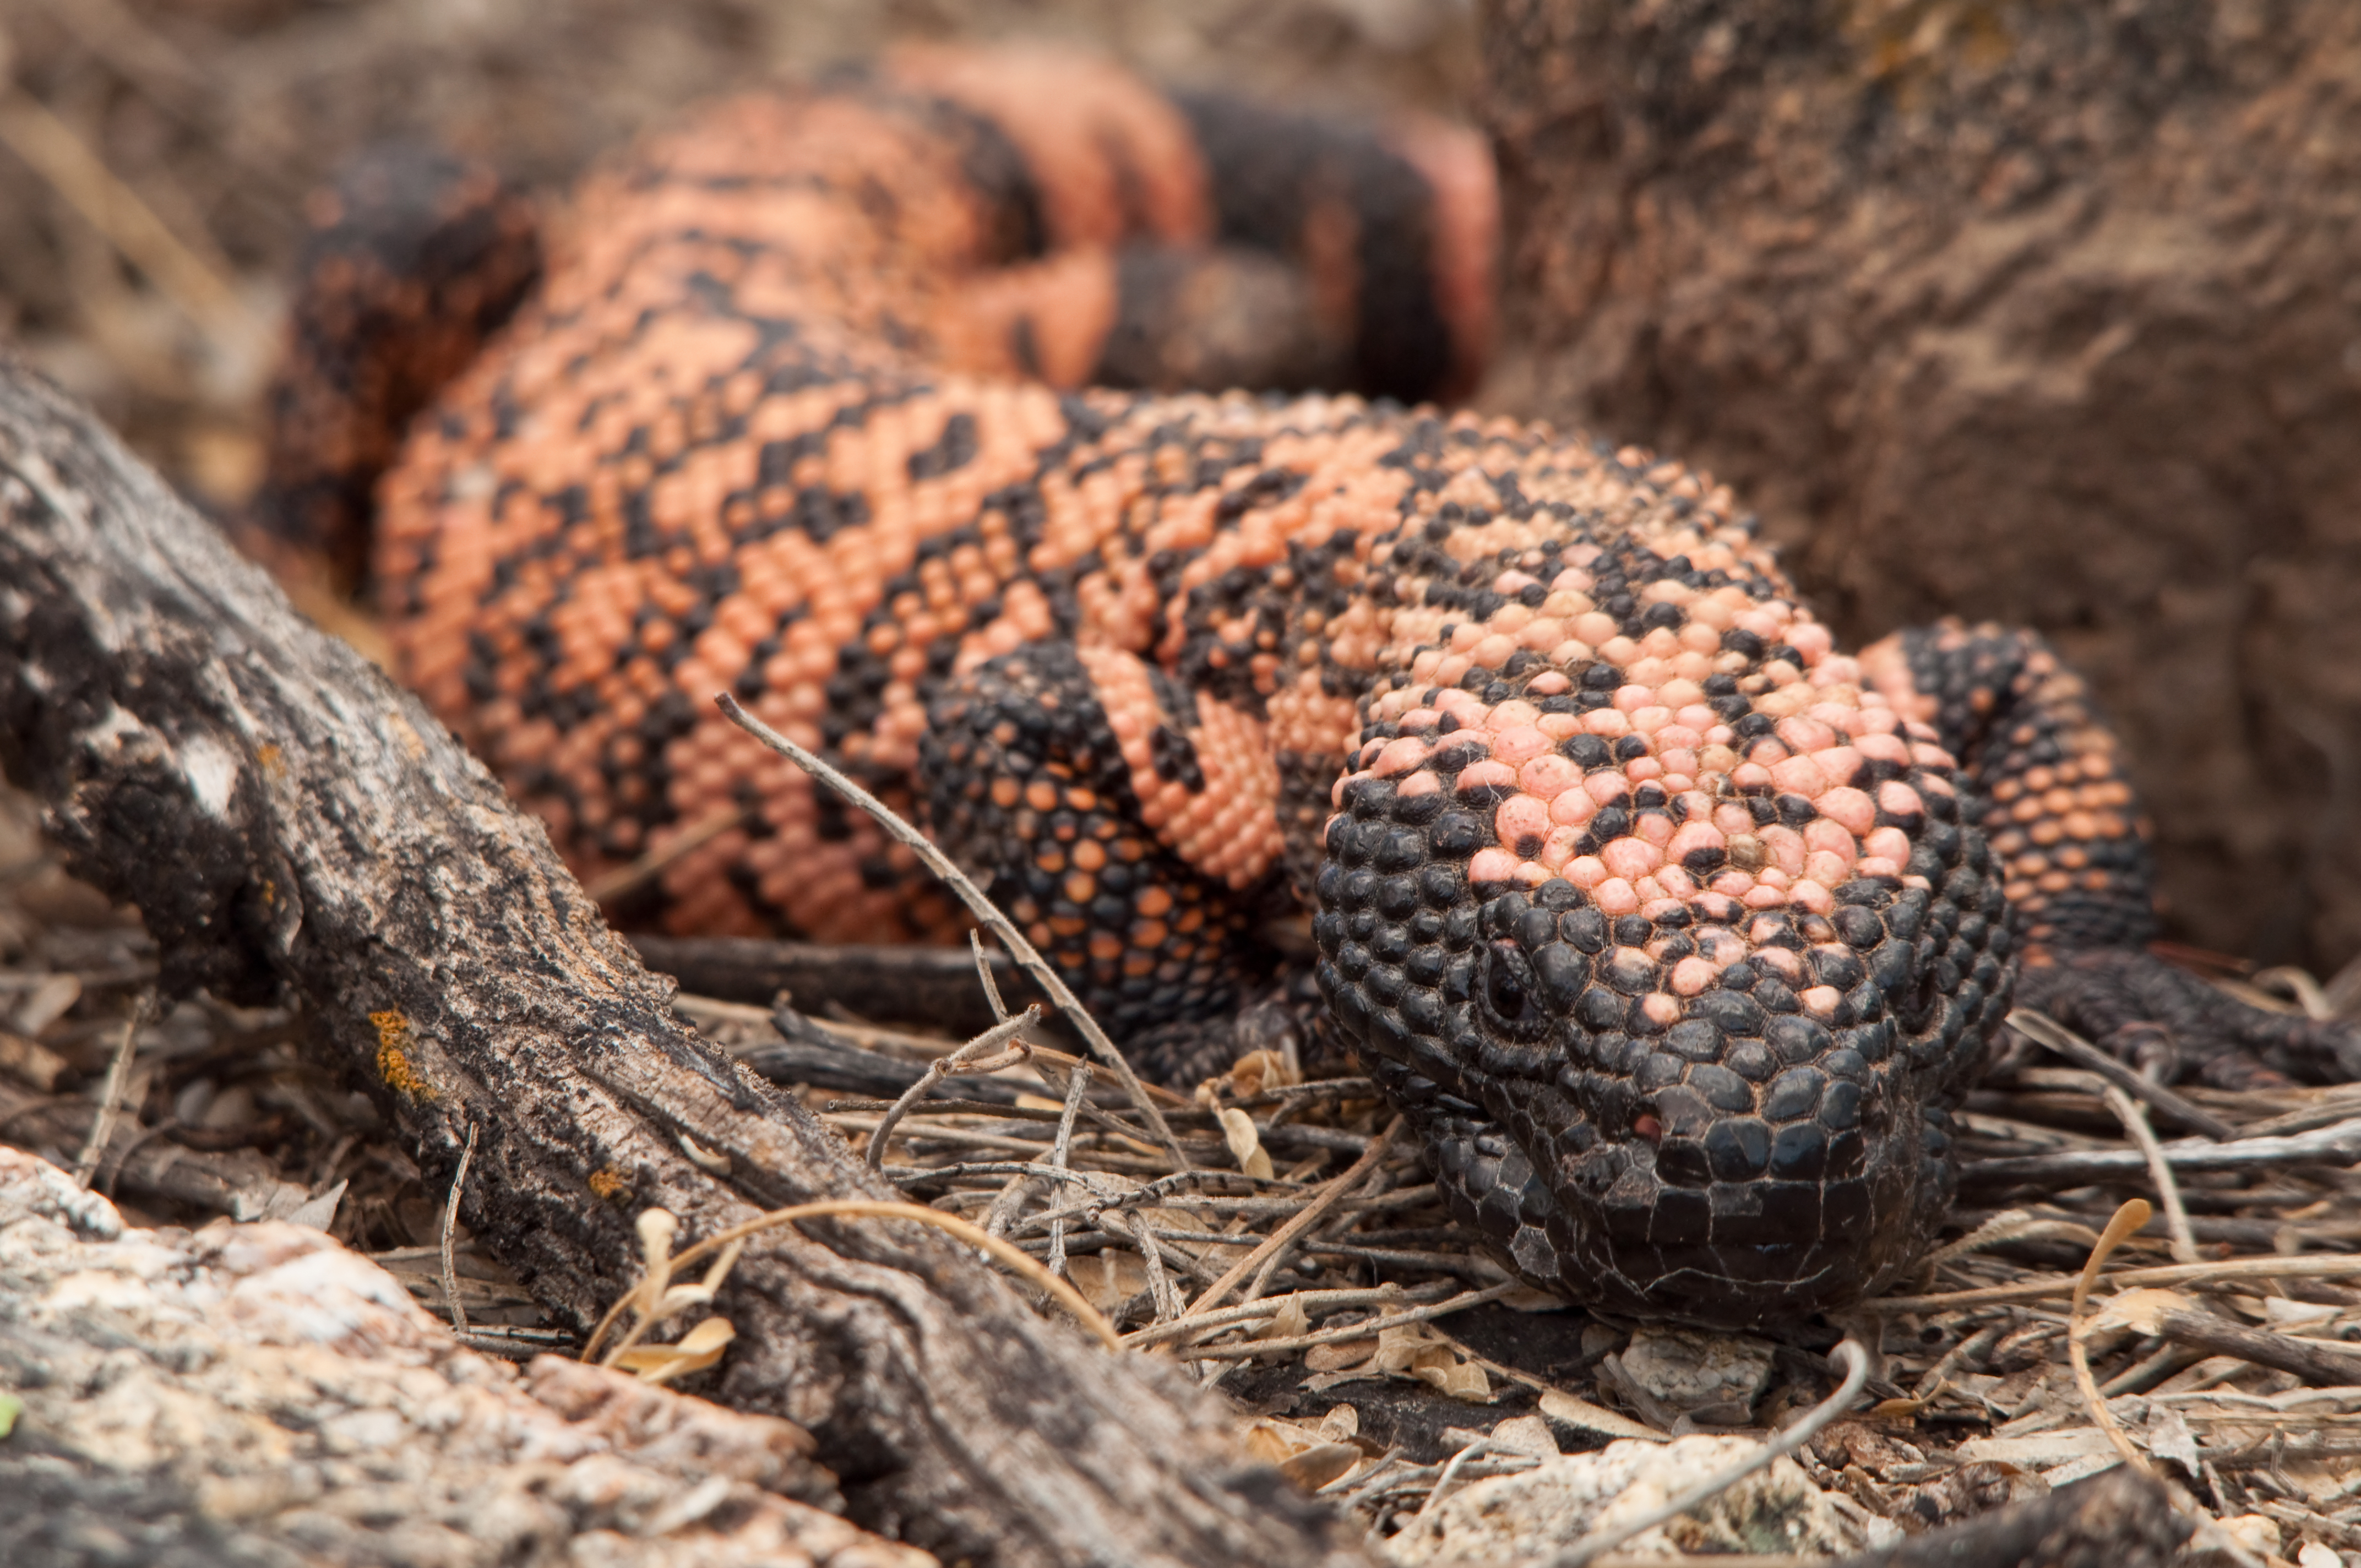 A Gila Monster (Heloderma suspectum) give the camera an impatient look. Saguaro National Park, Arizona. (Getty Images)